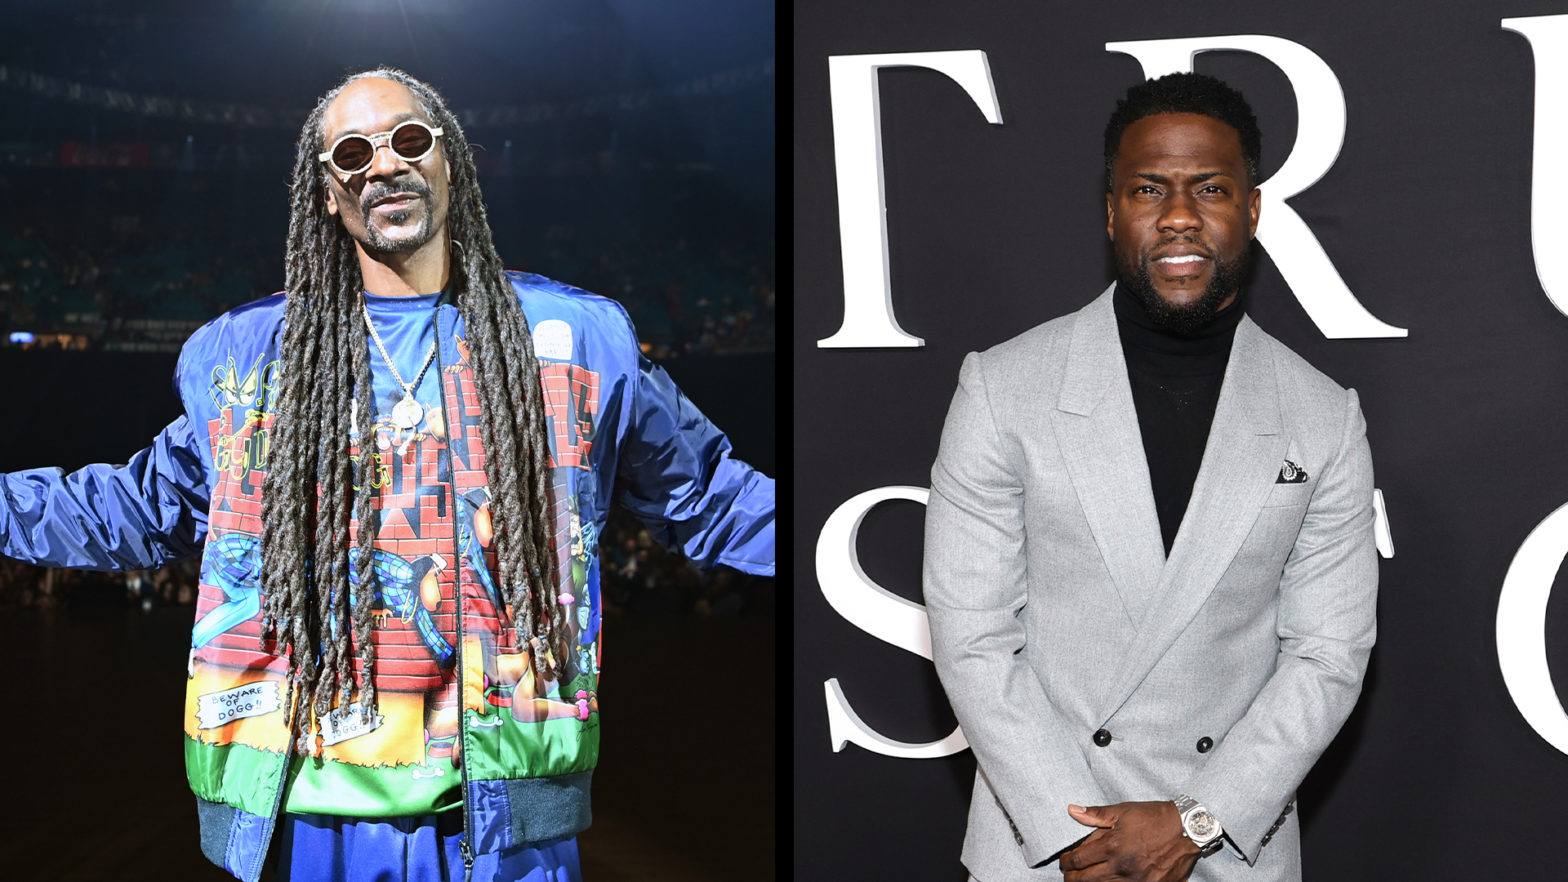 Snoop Dogg Talks The Metaverse With Kevin Hart, 'Ion Know Sh-t About It, But I'm Getting This Money'